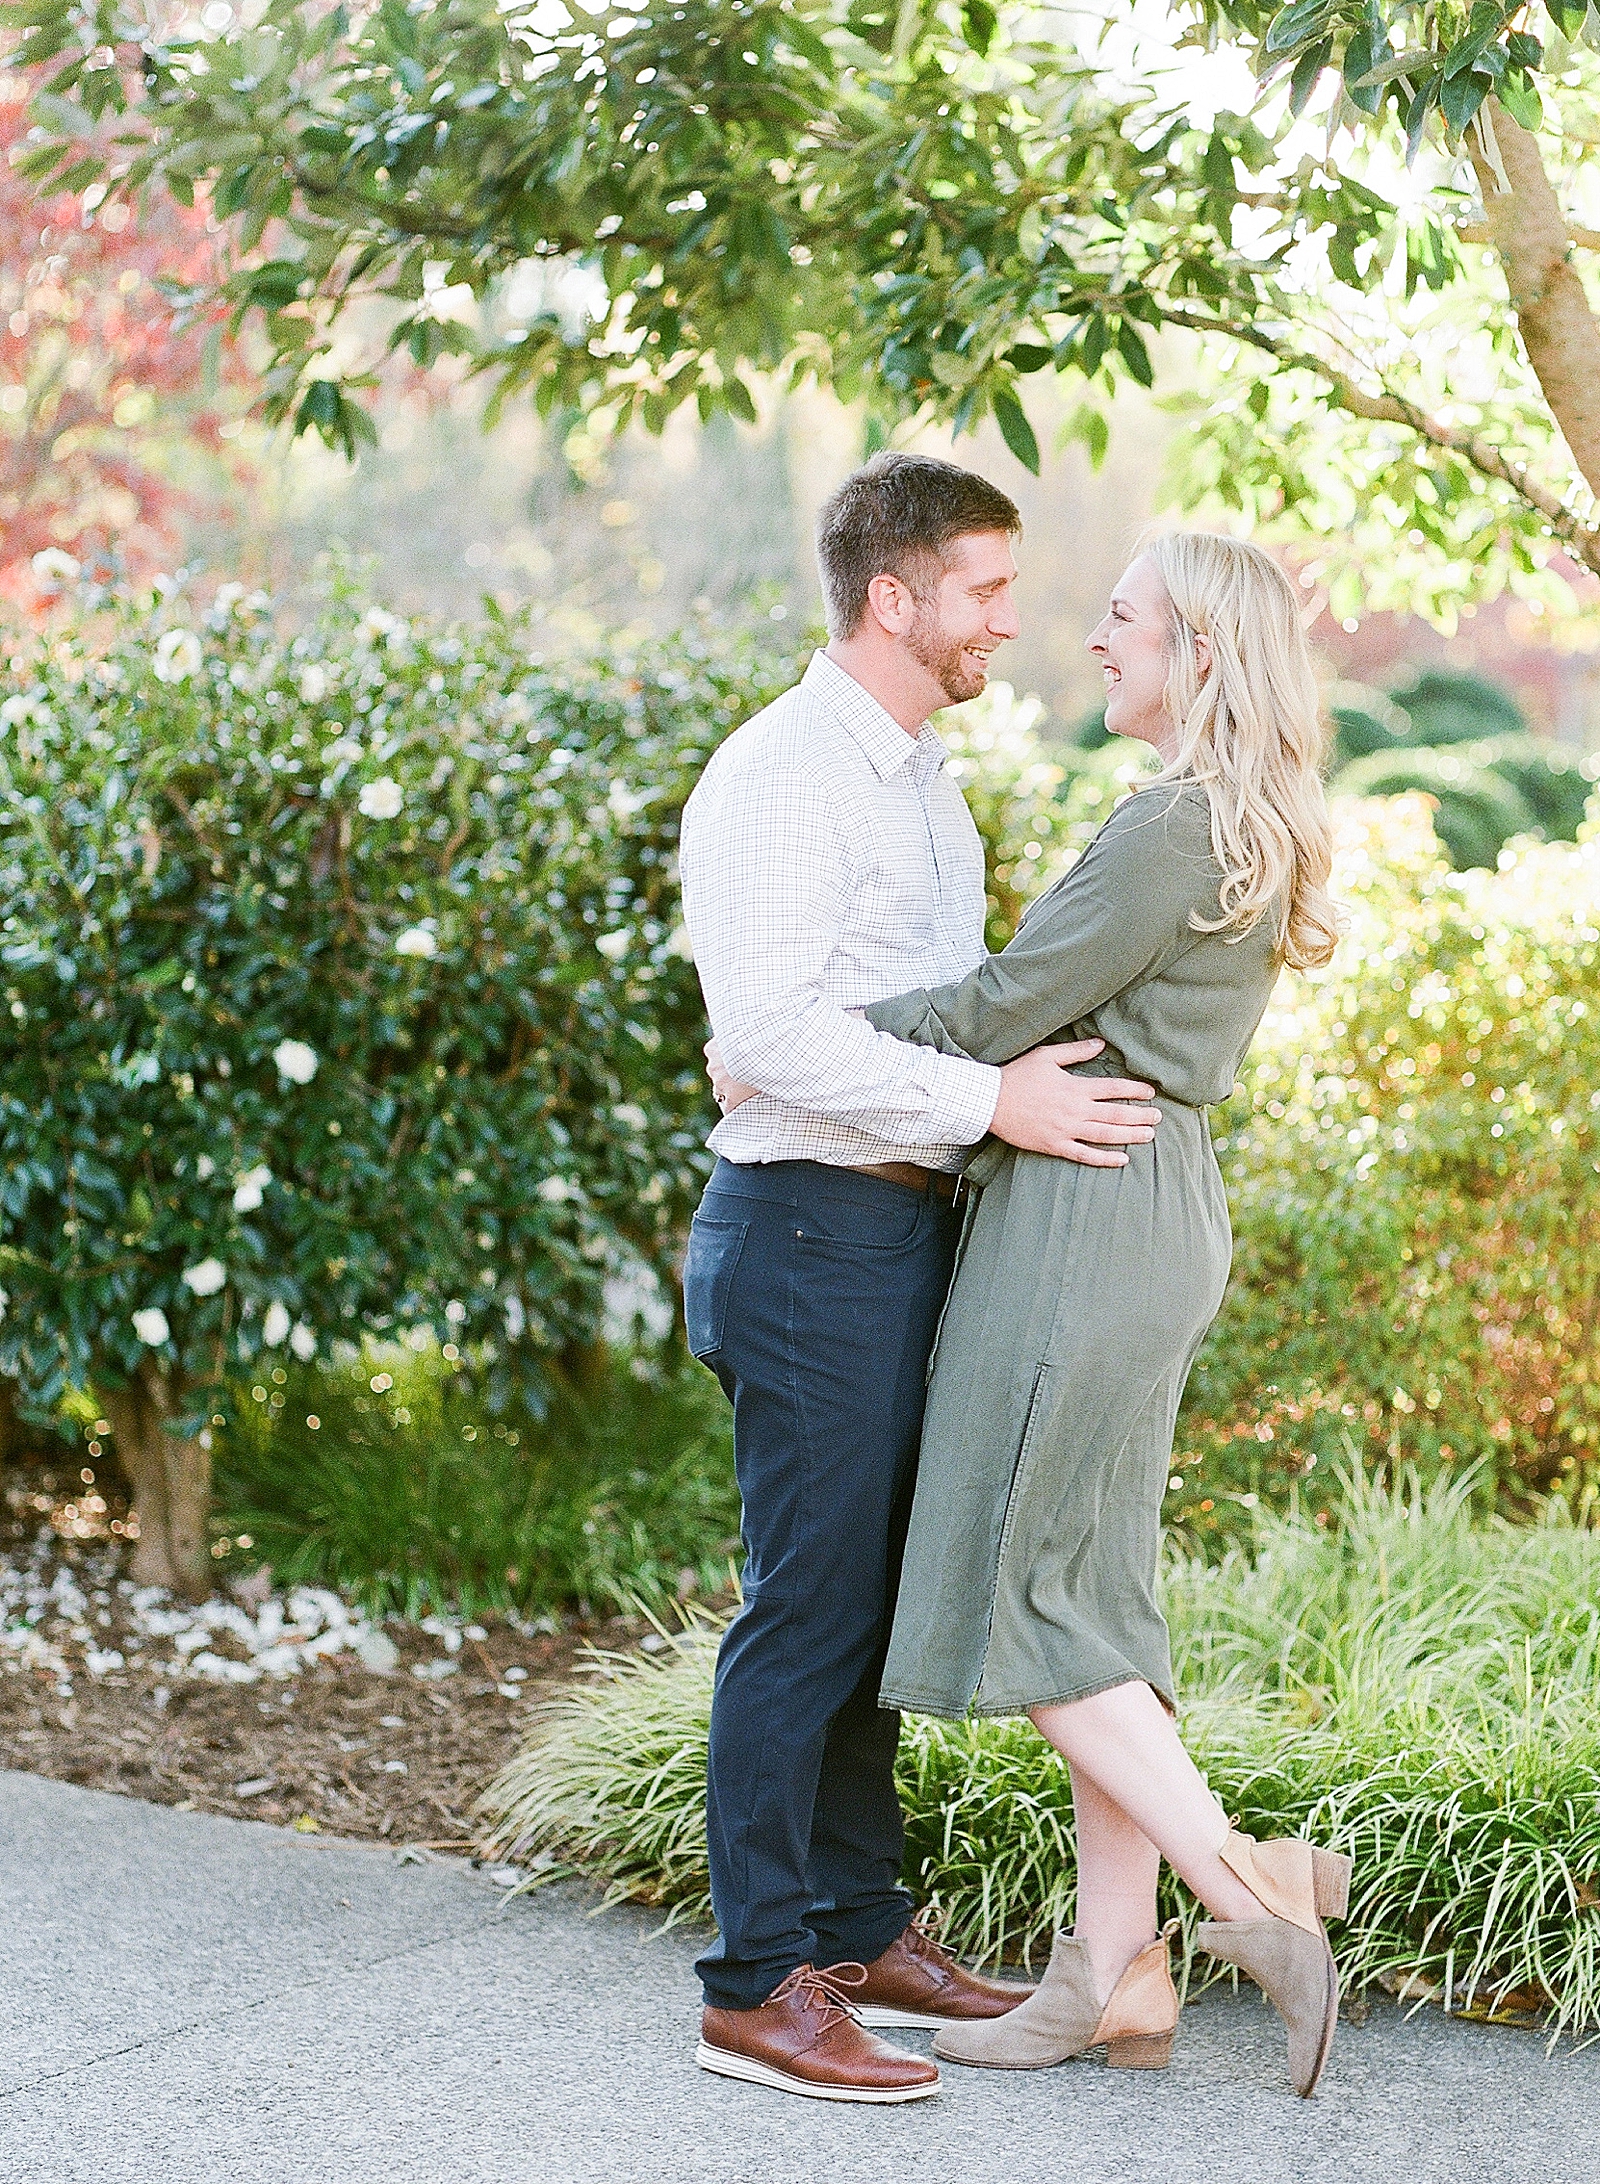 How To Have The Best Asheville Arboretum Engagement Photos